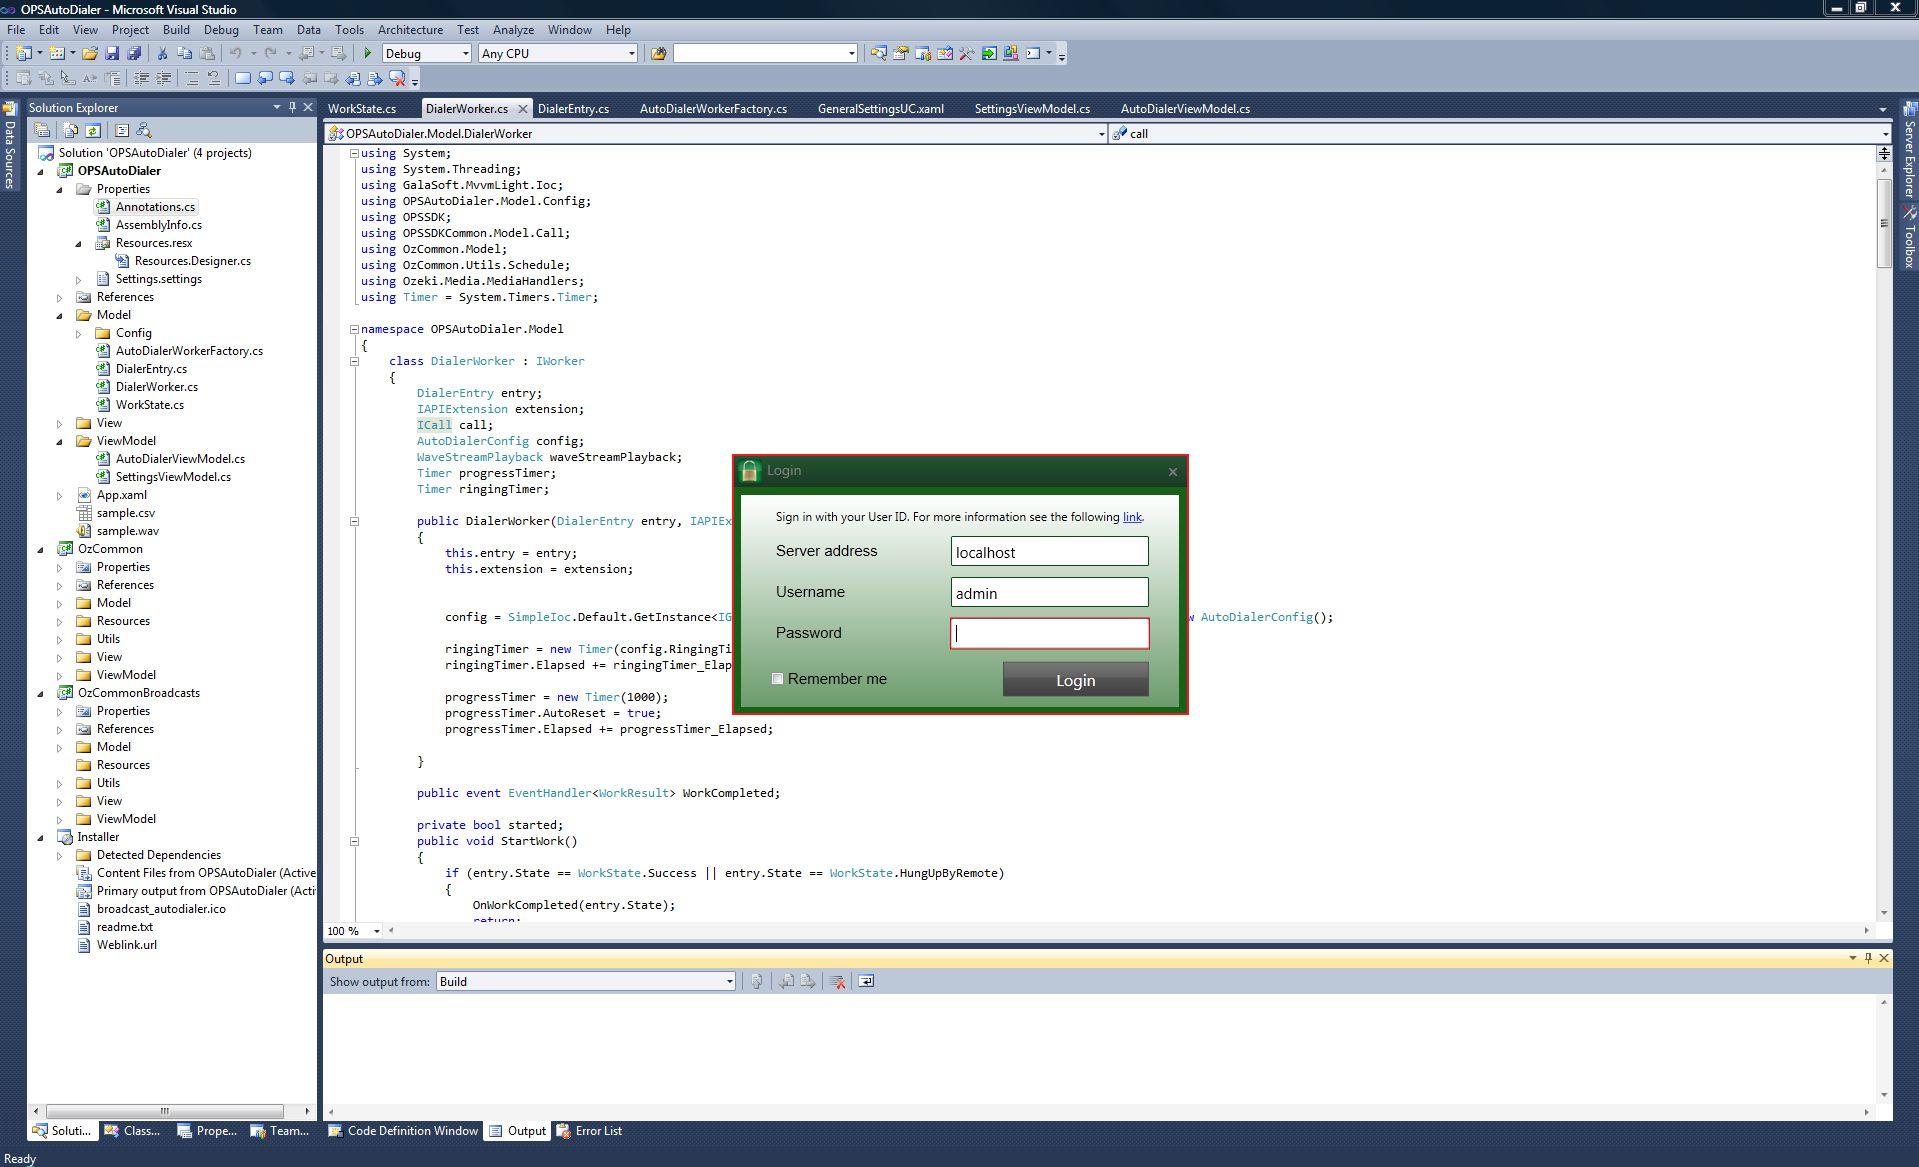 starting window of opsautodialer program with source code in background